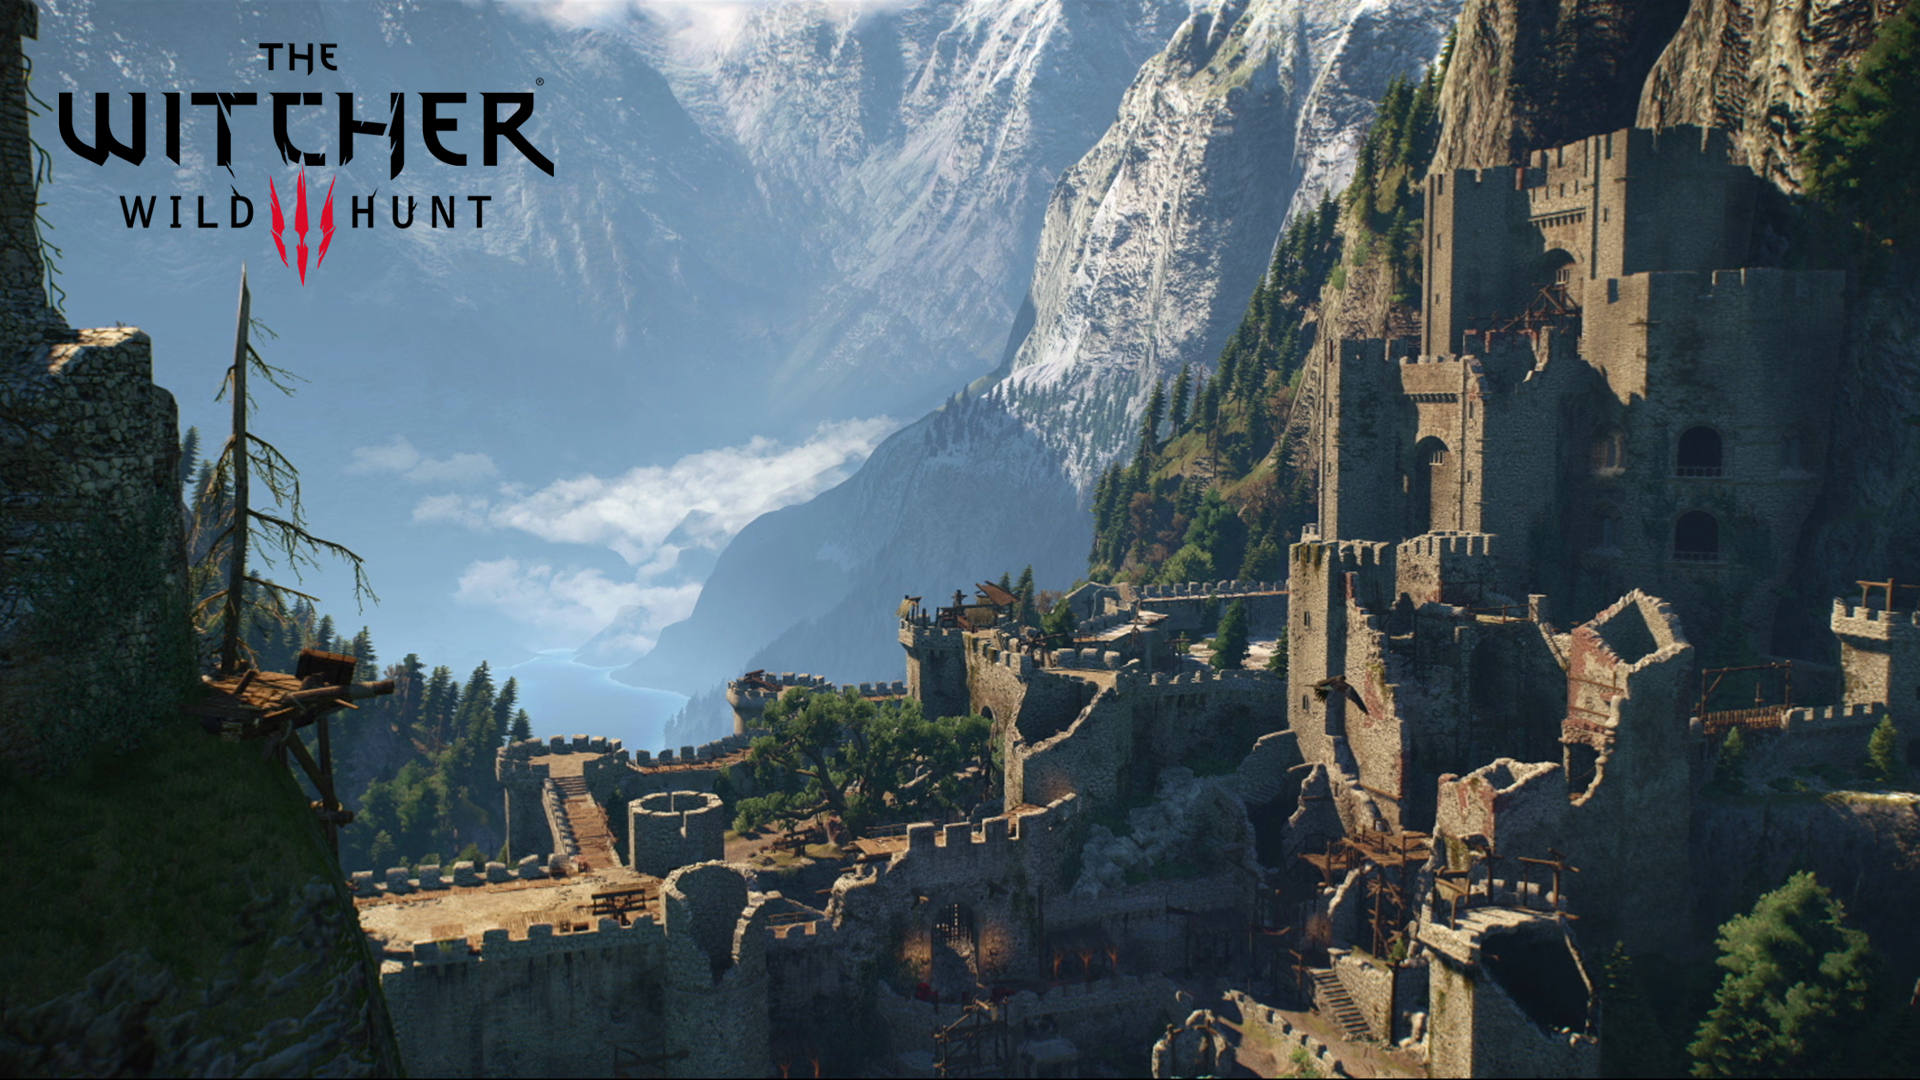 The Witcher 3: Wild Hunt Kaer Morhen. Virtual background to use on Zoom, Microsoft Teams, Skype, Google Meet, WebEx or any other compatible app.